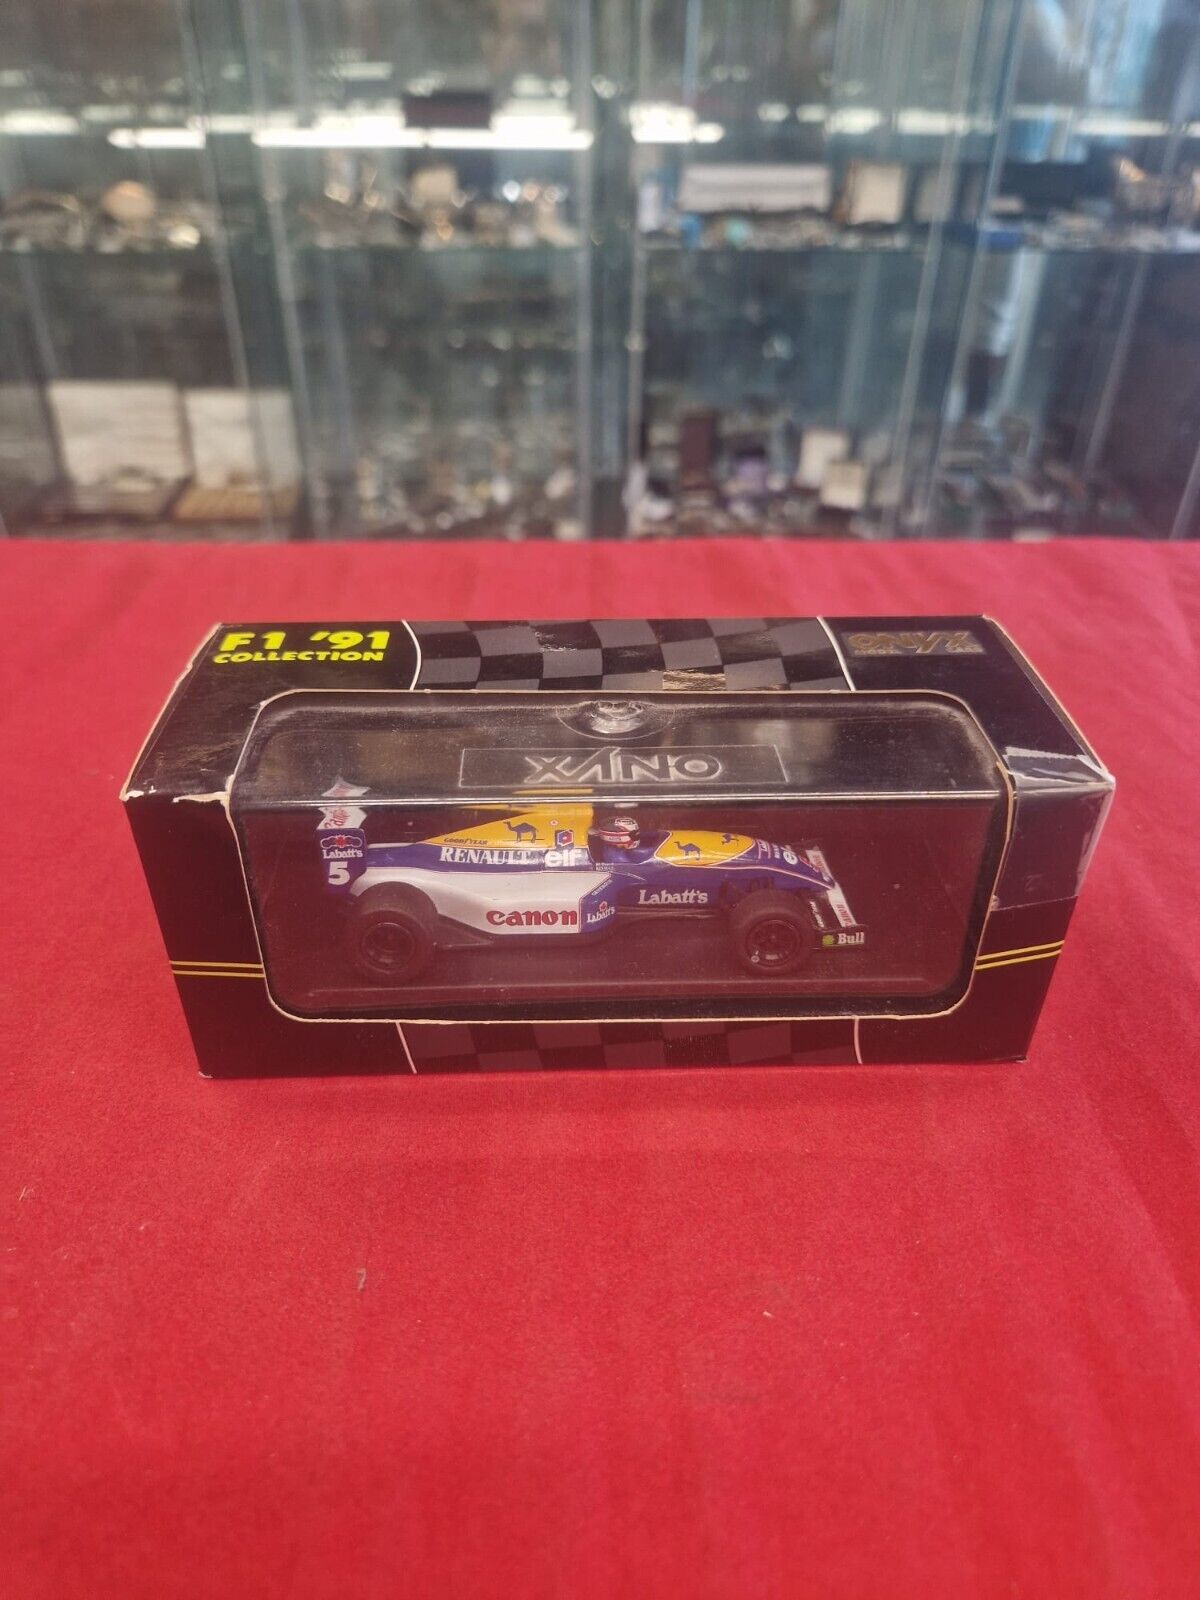 RARE Onyx Model Cars 119 Williams Renault F1 Nigel Mansell F1 '91  Collection Car - Ossett Antiques